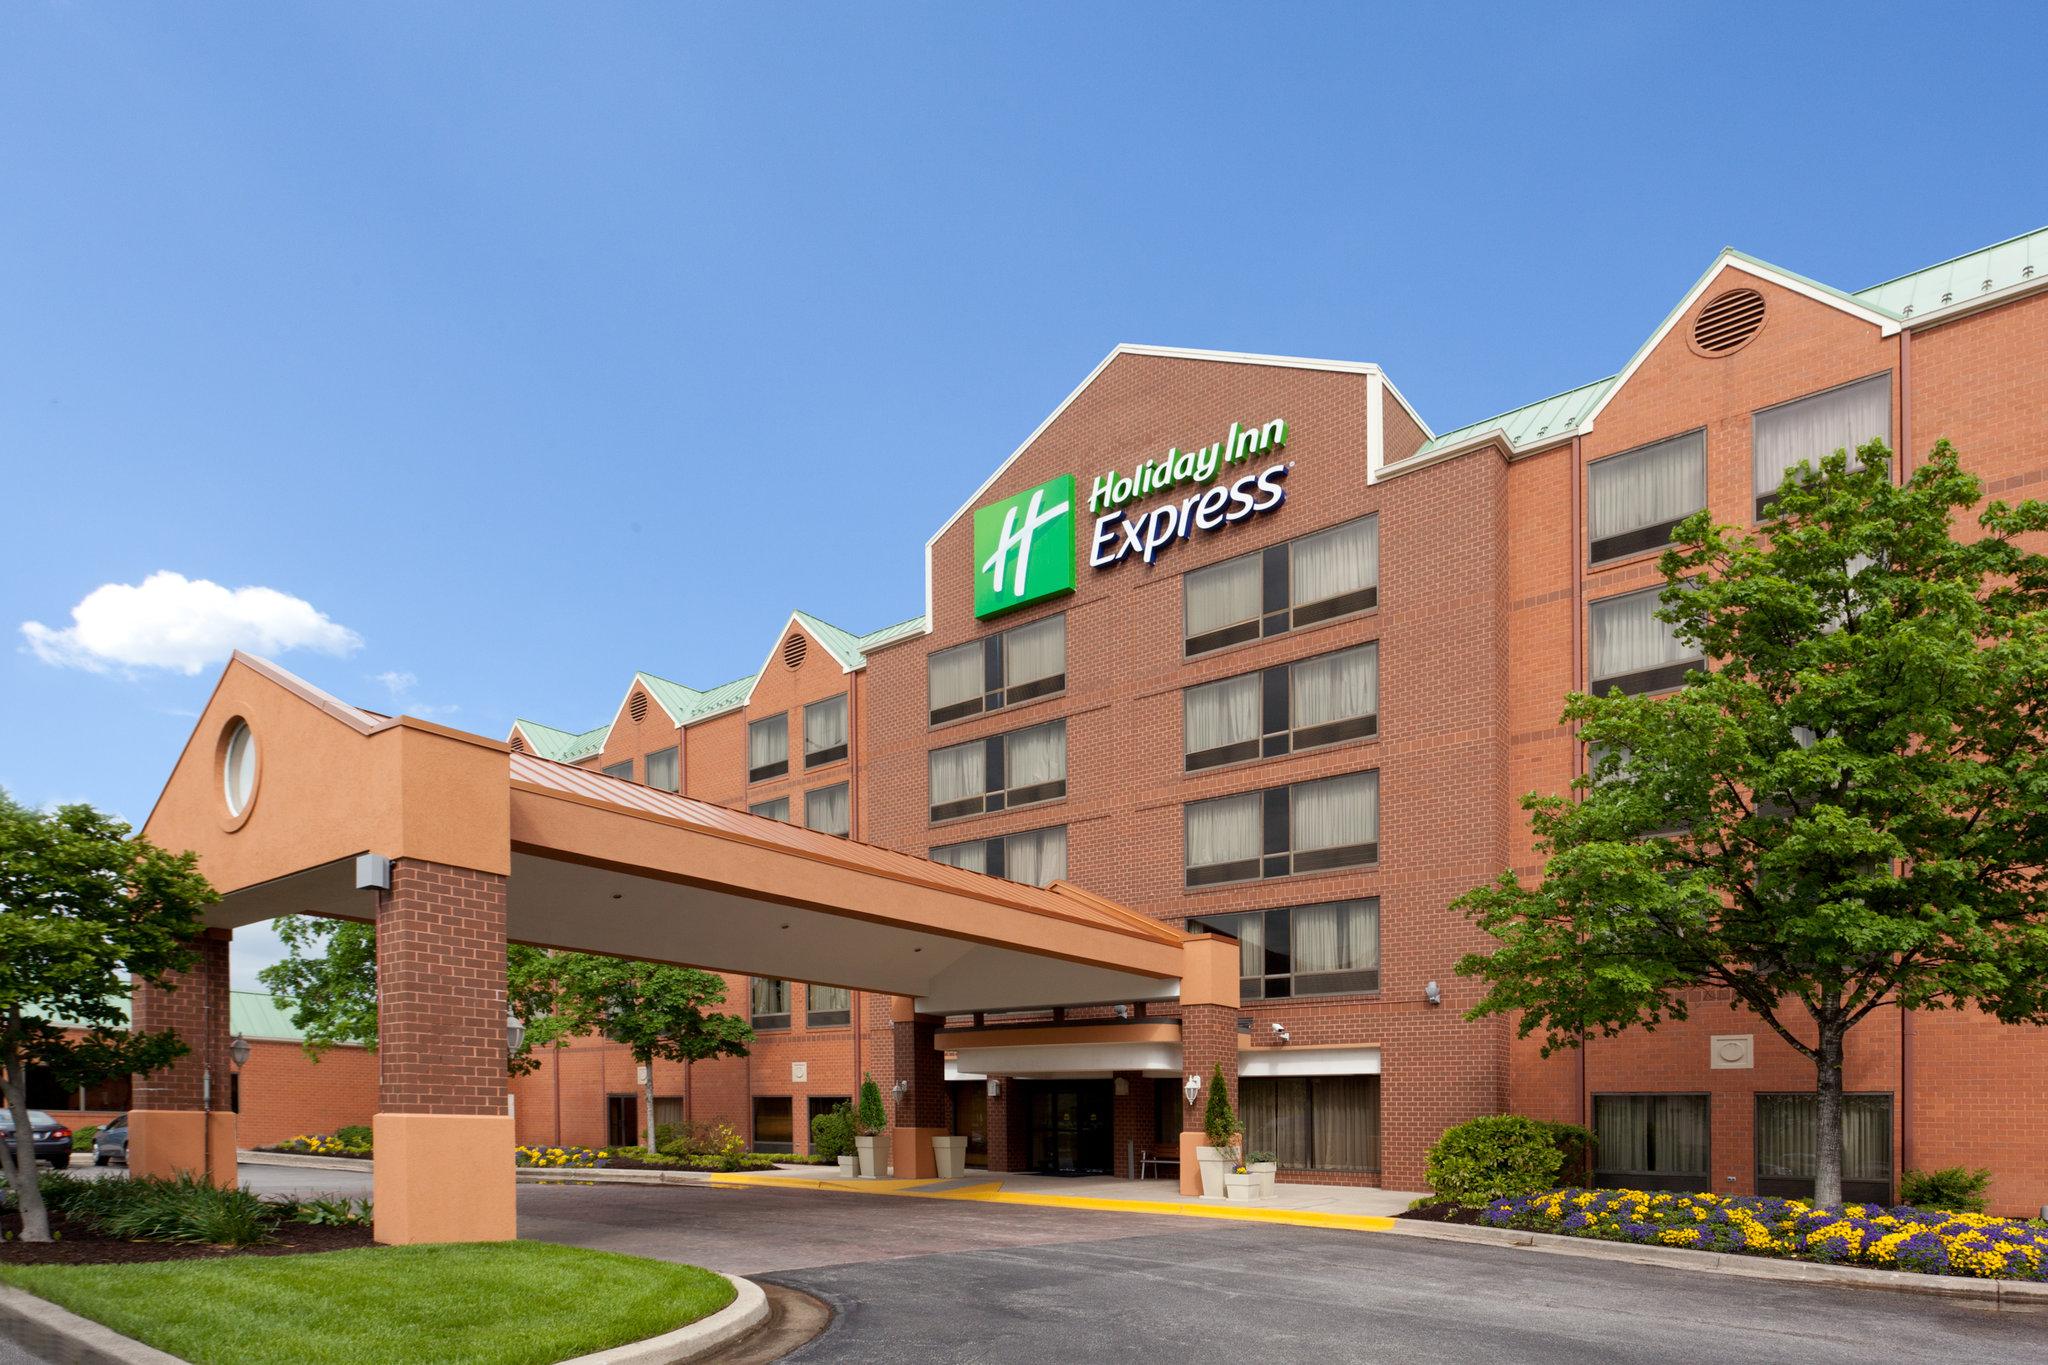 Holiday Inn Express Baltimore-Bwi Airport West in Hanover, MD